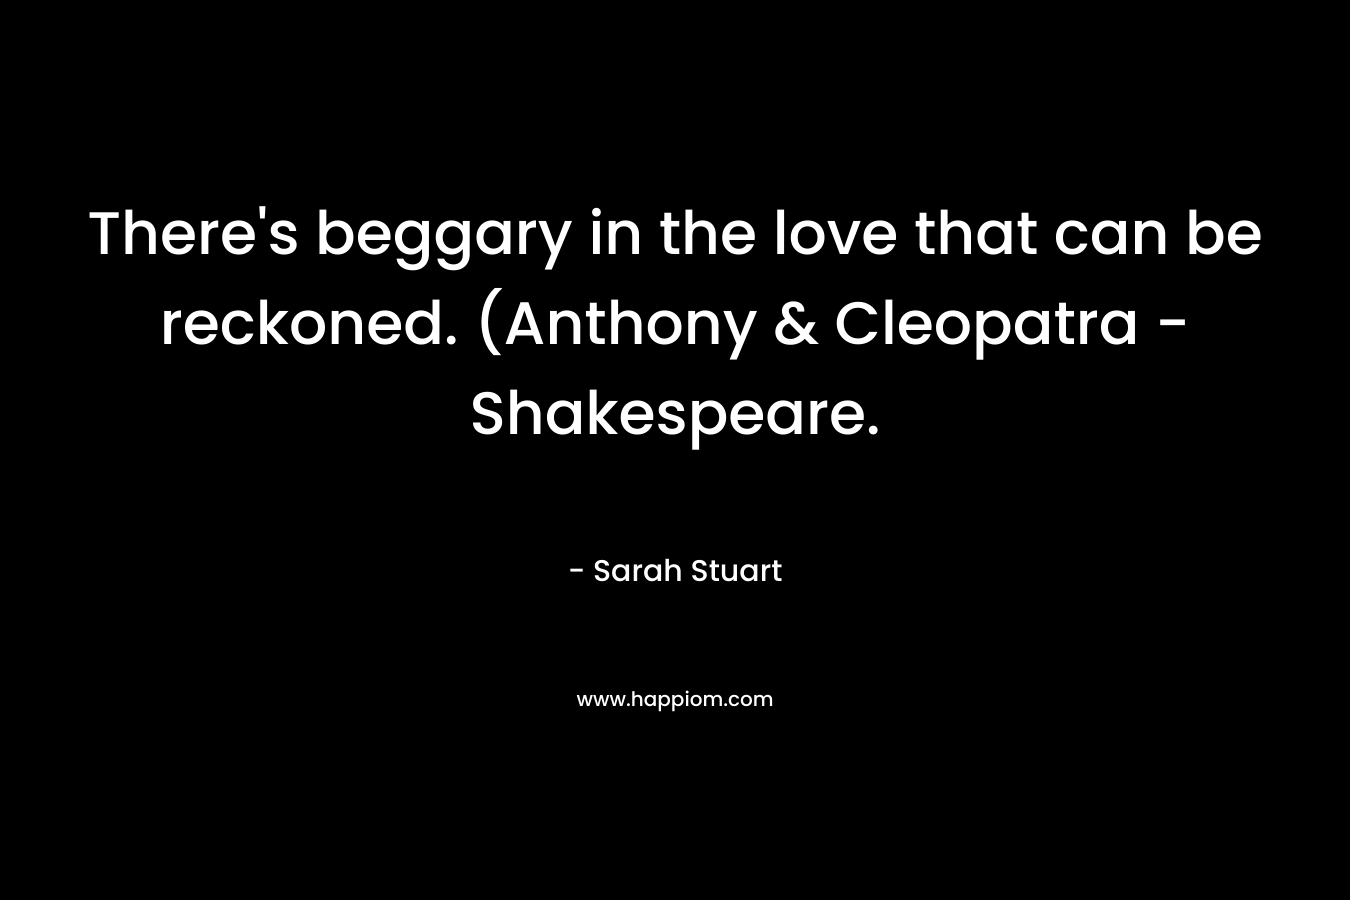 There's beggary in the love that can be reckoned. (Anthony & Cleopatra - Shakespeare.